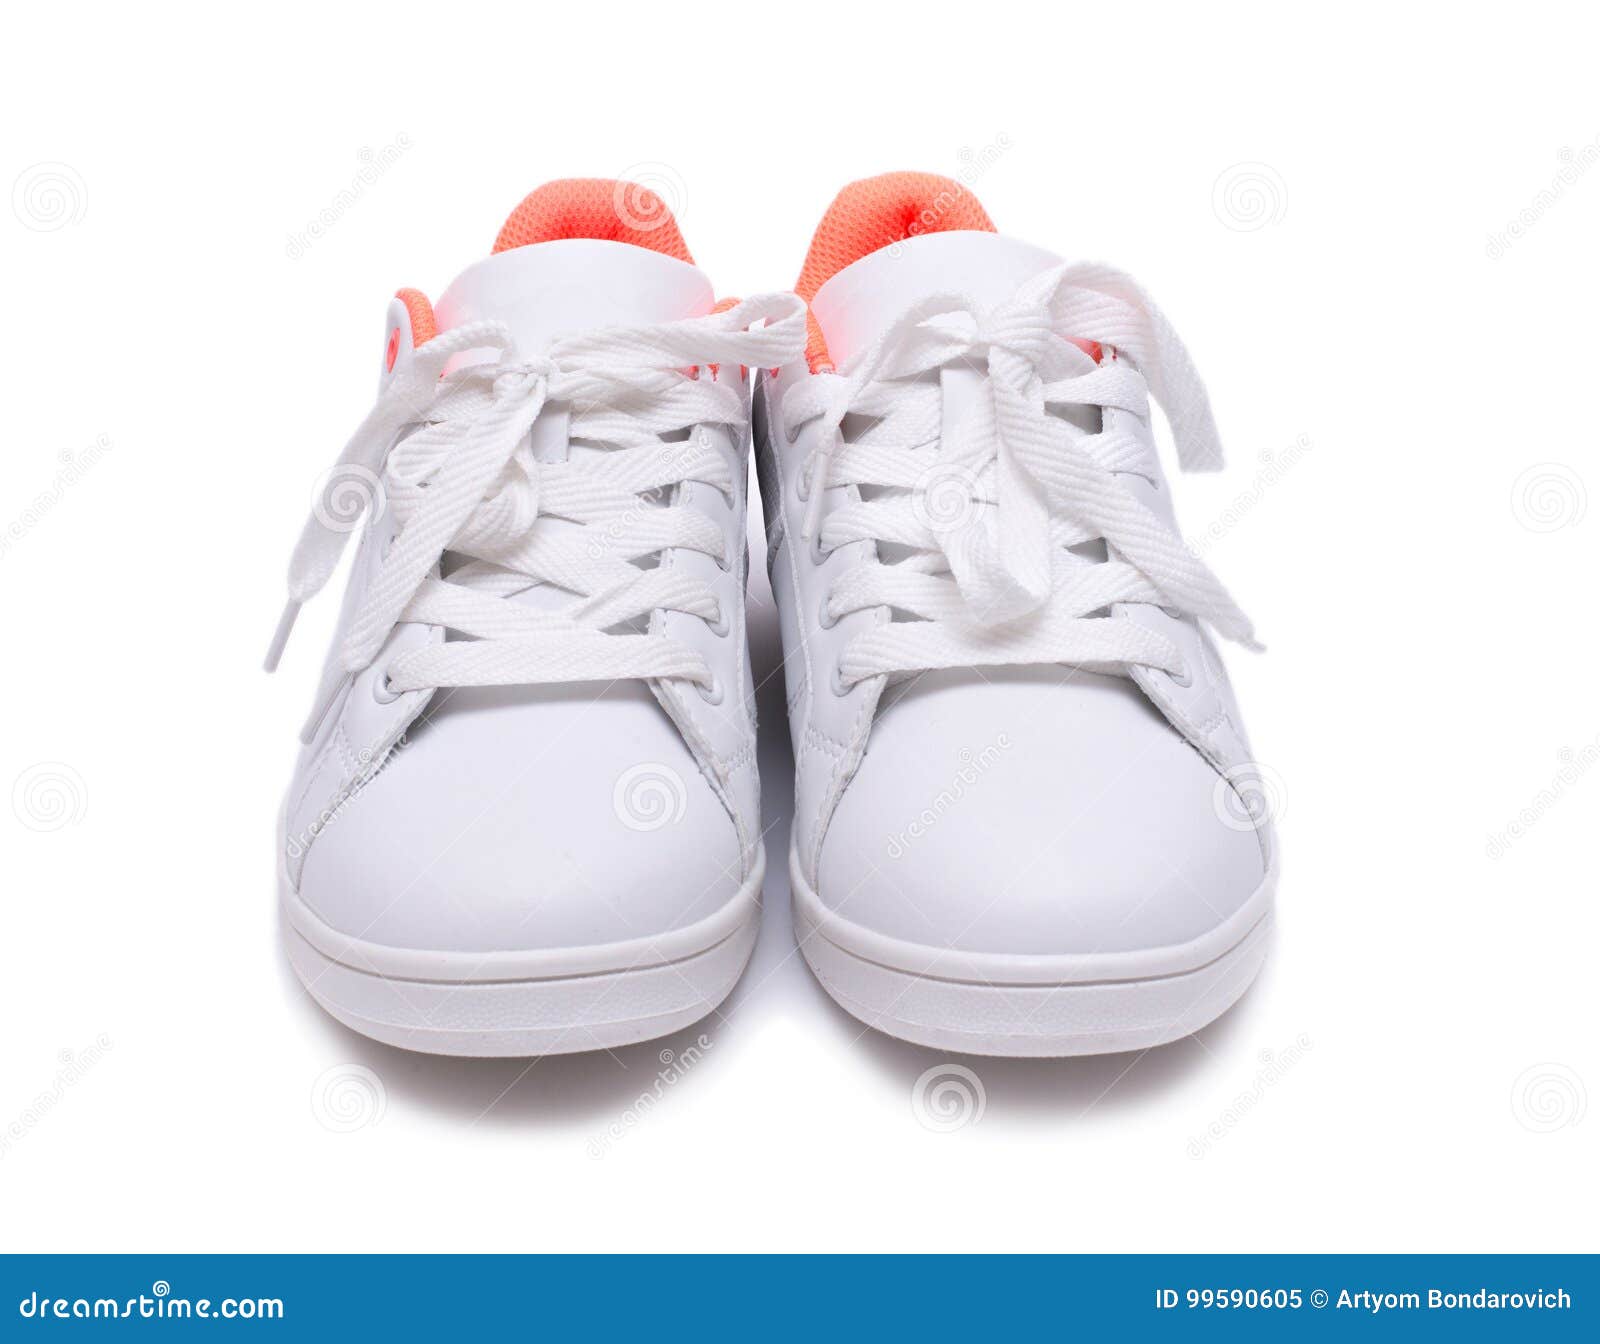 Pair of White Sneakers on White Background. Sport Shoes. Stock Image ...